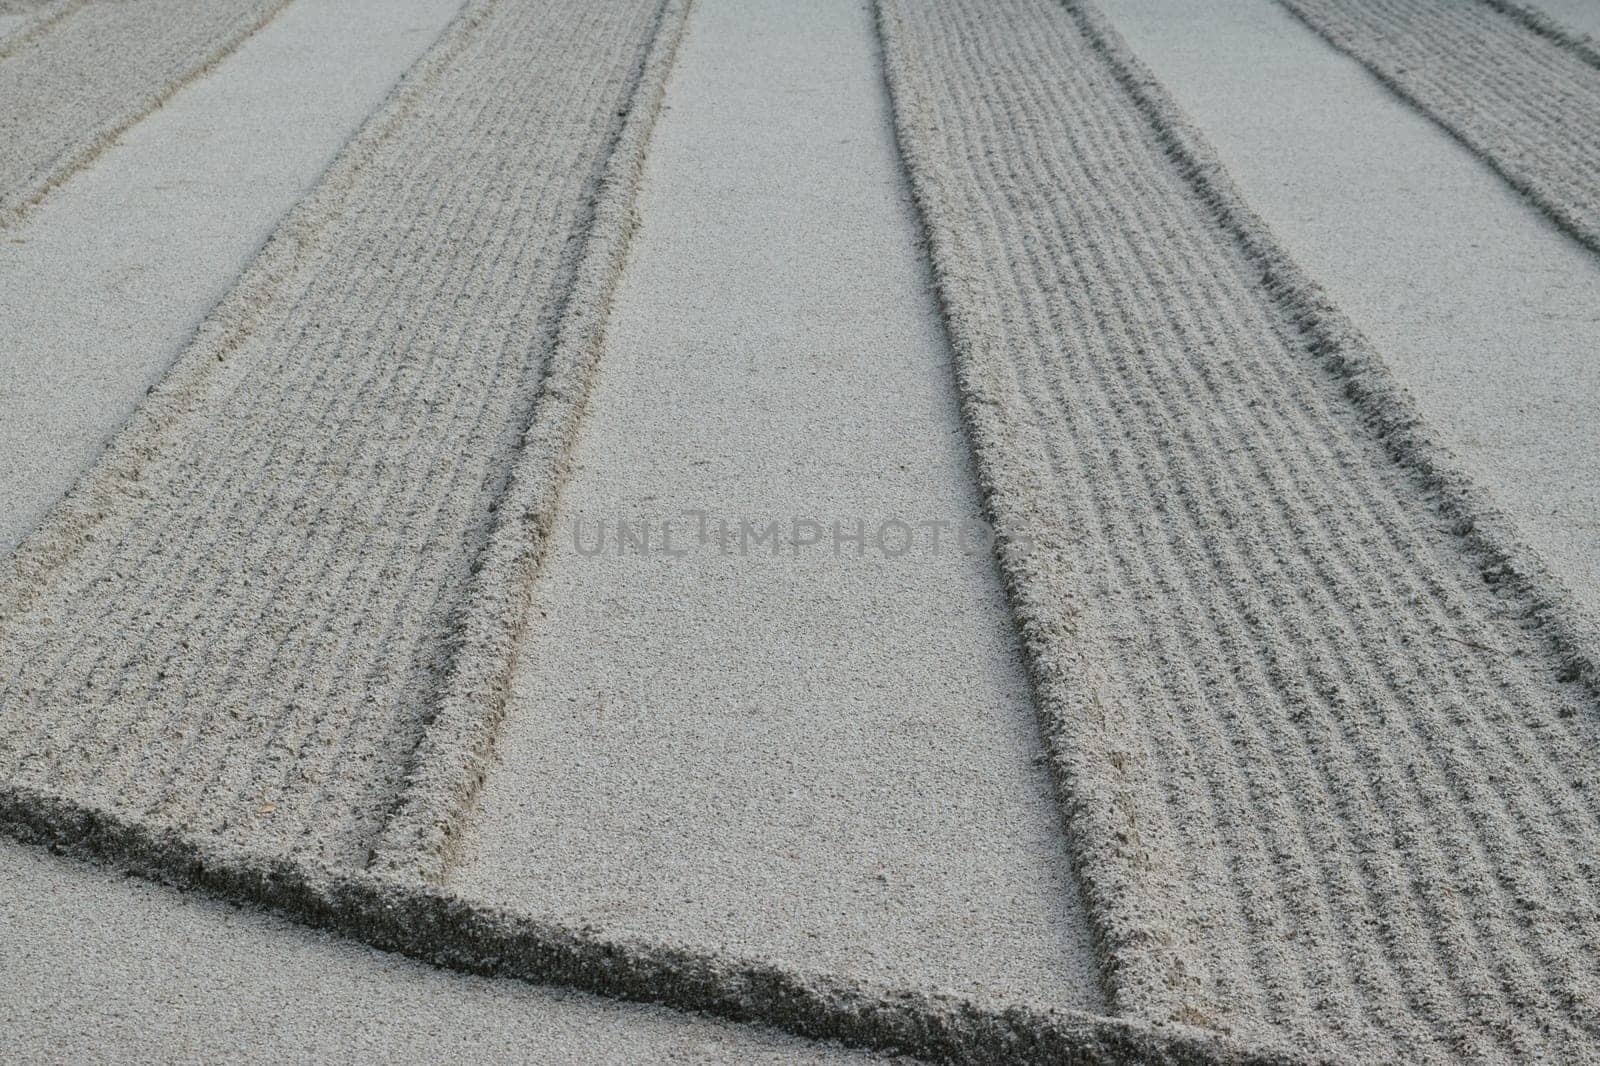 Close-up of a zen garden with meticulously raked sand creating parallel lines and patterns.